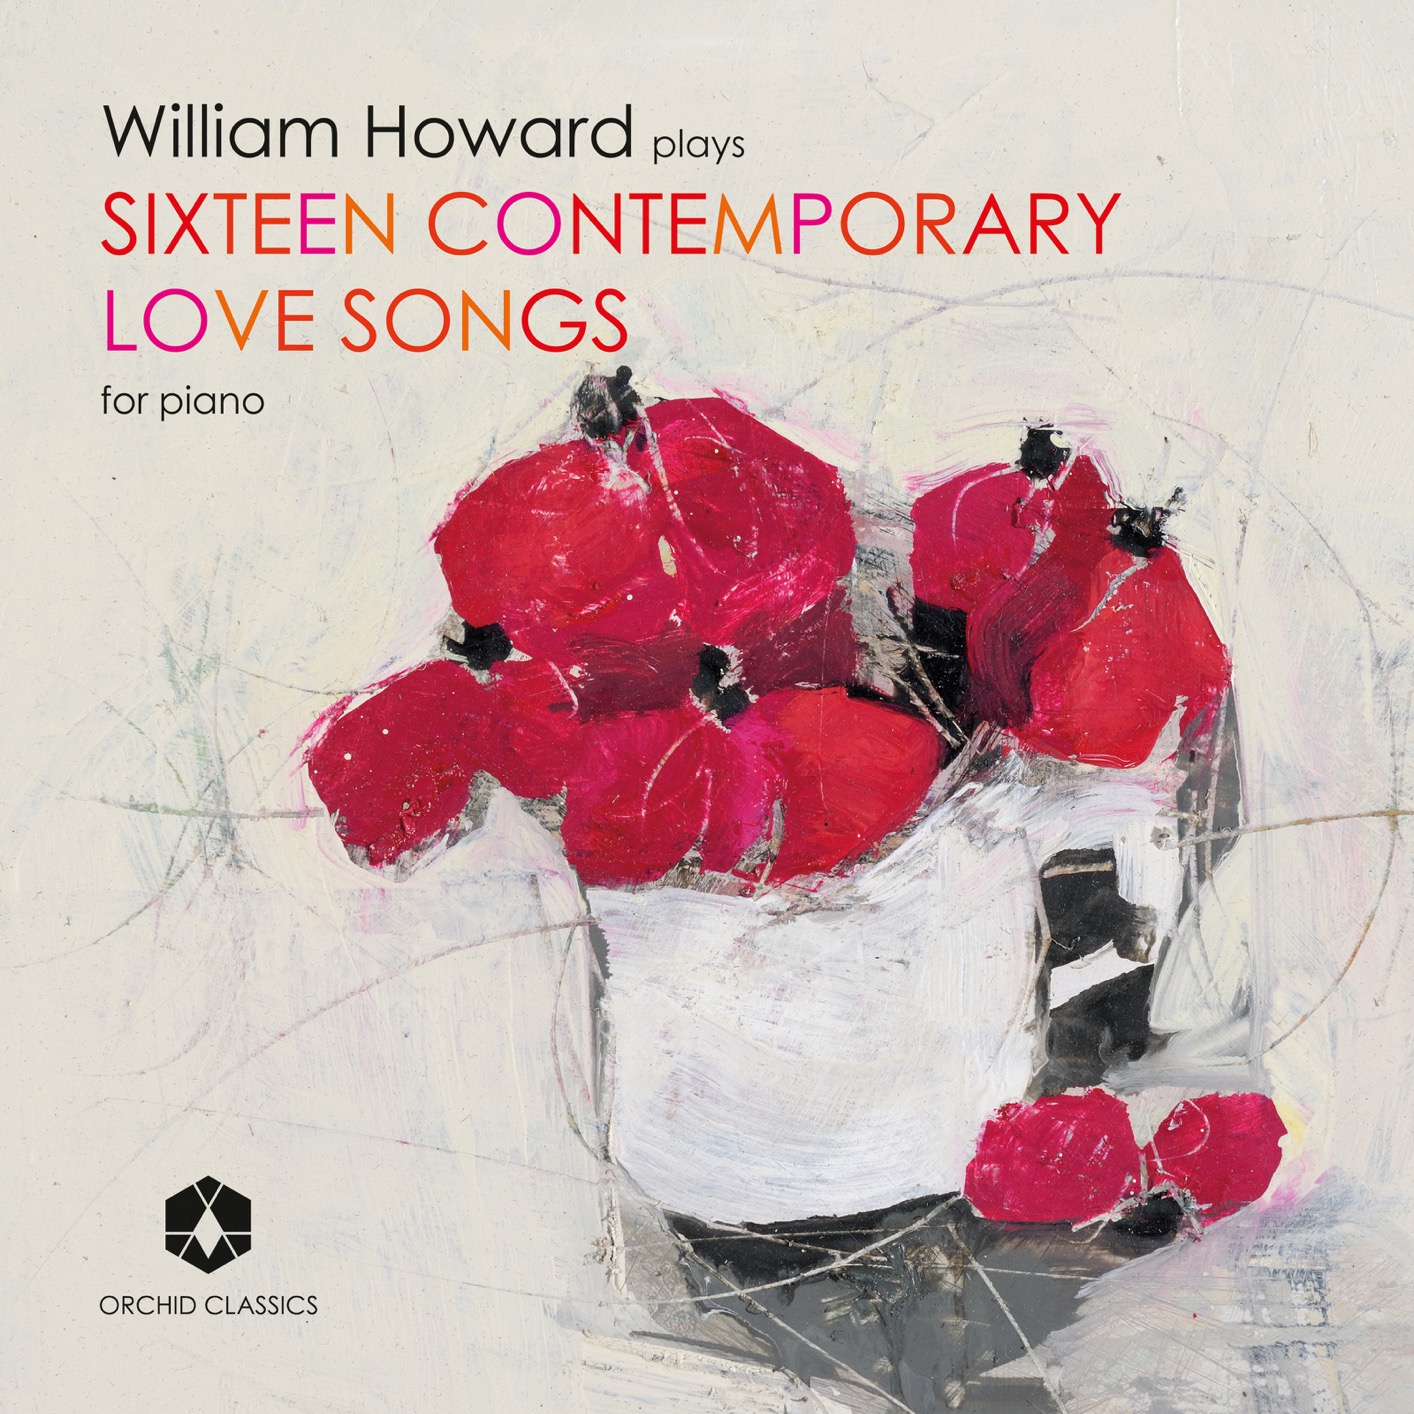 William Howard – Sixteen Contemporary Love Songs for Piano (2018) [FLAC 24bit/96kHz]